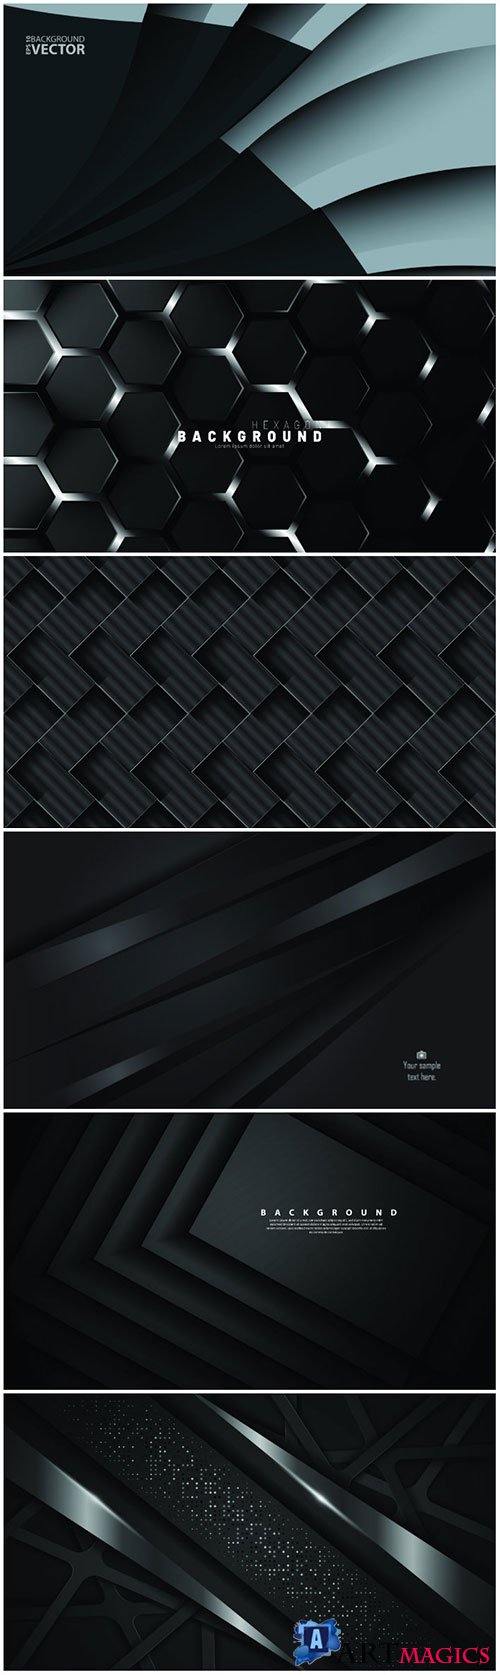 Abstract vector background with dark gray metal